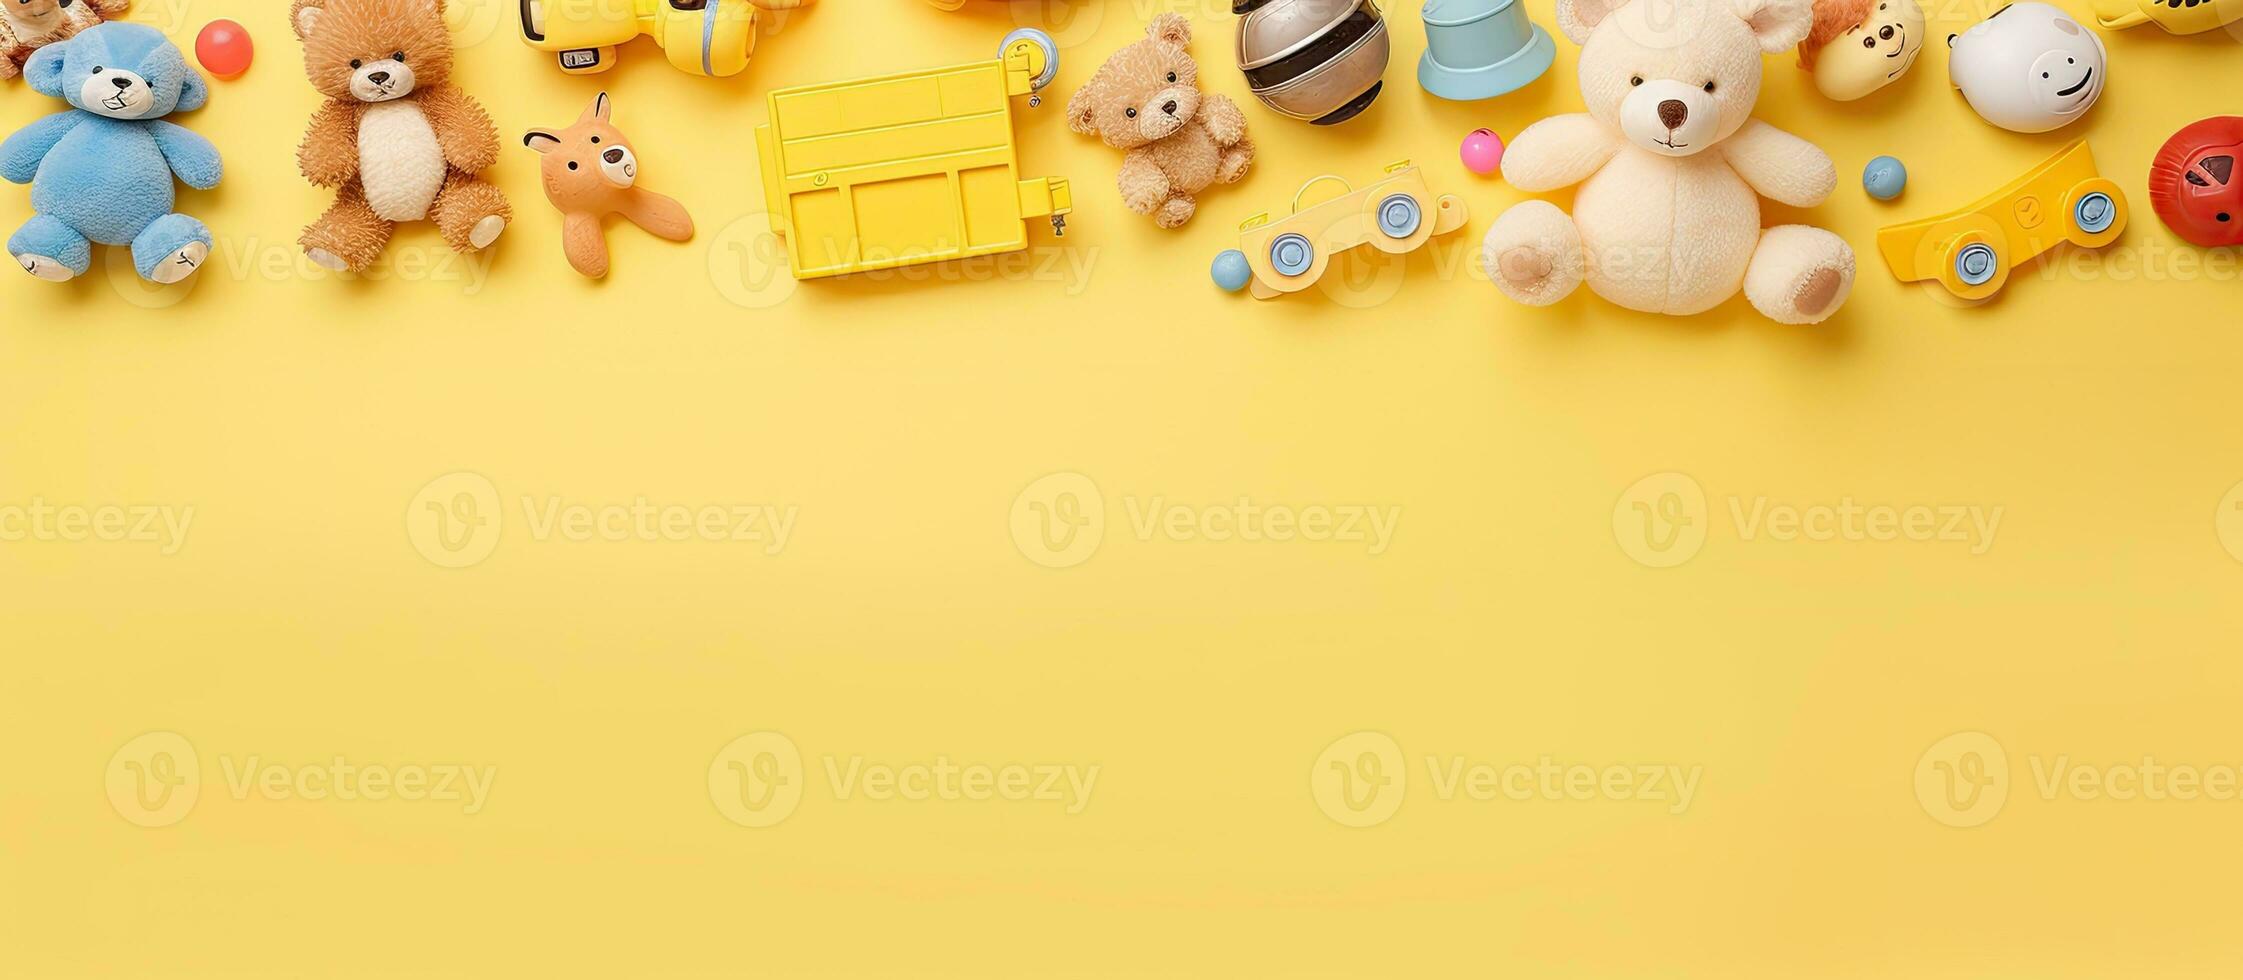 collection of baby and kids toys placed on a pastel yellow background. The photograph is taken photo